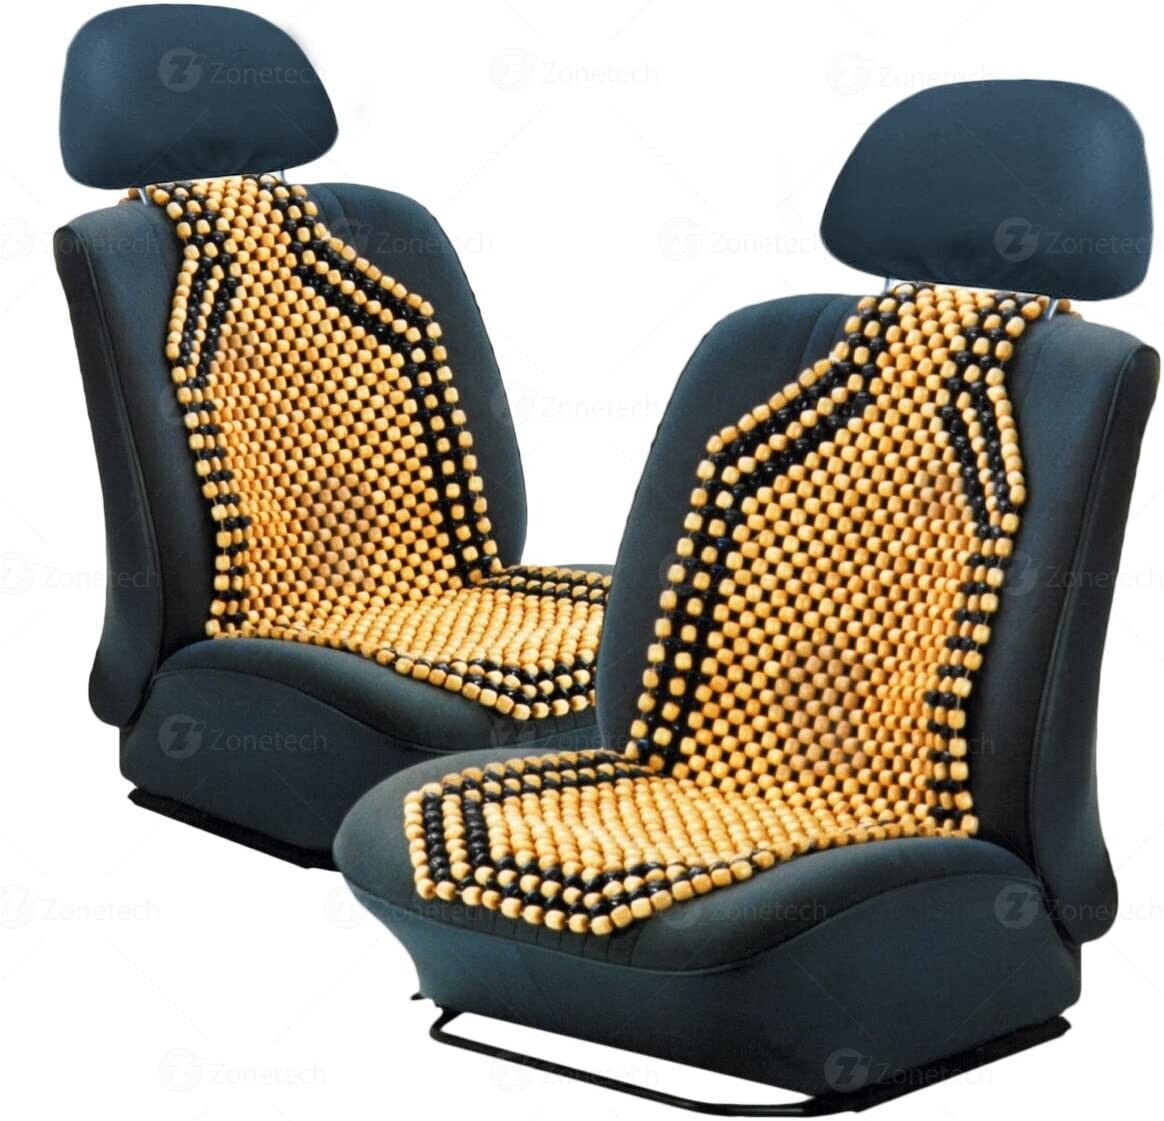 Zone Tech 2x Two Tone Wooden Beaded Beads Car Seat Cushions Massaging Cover